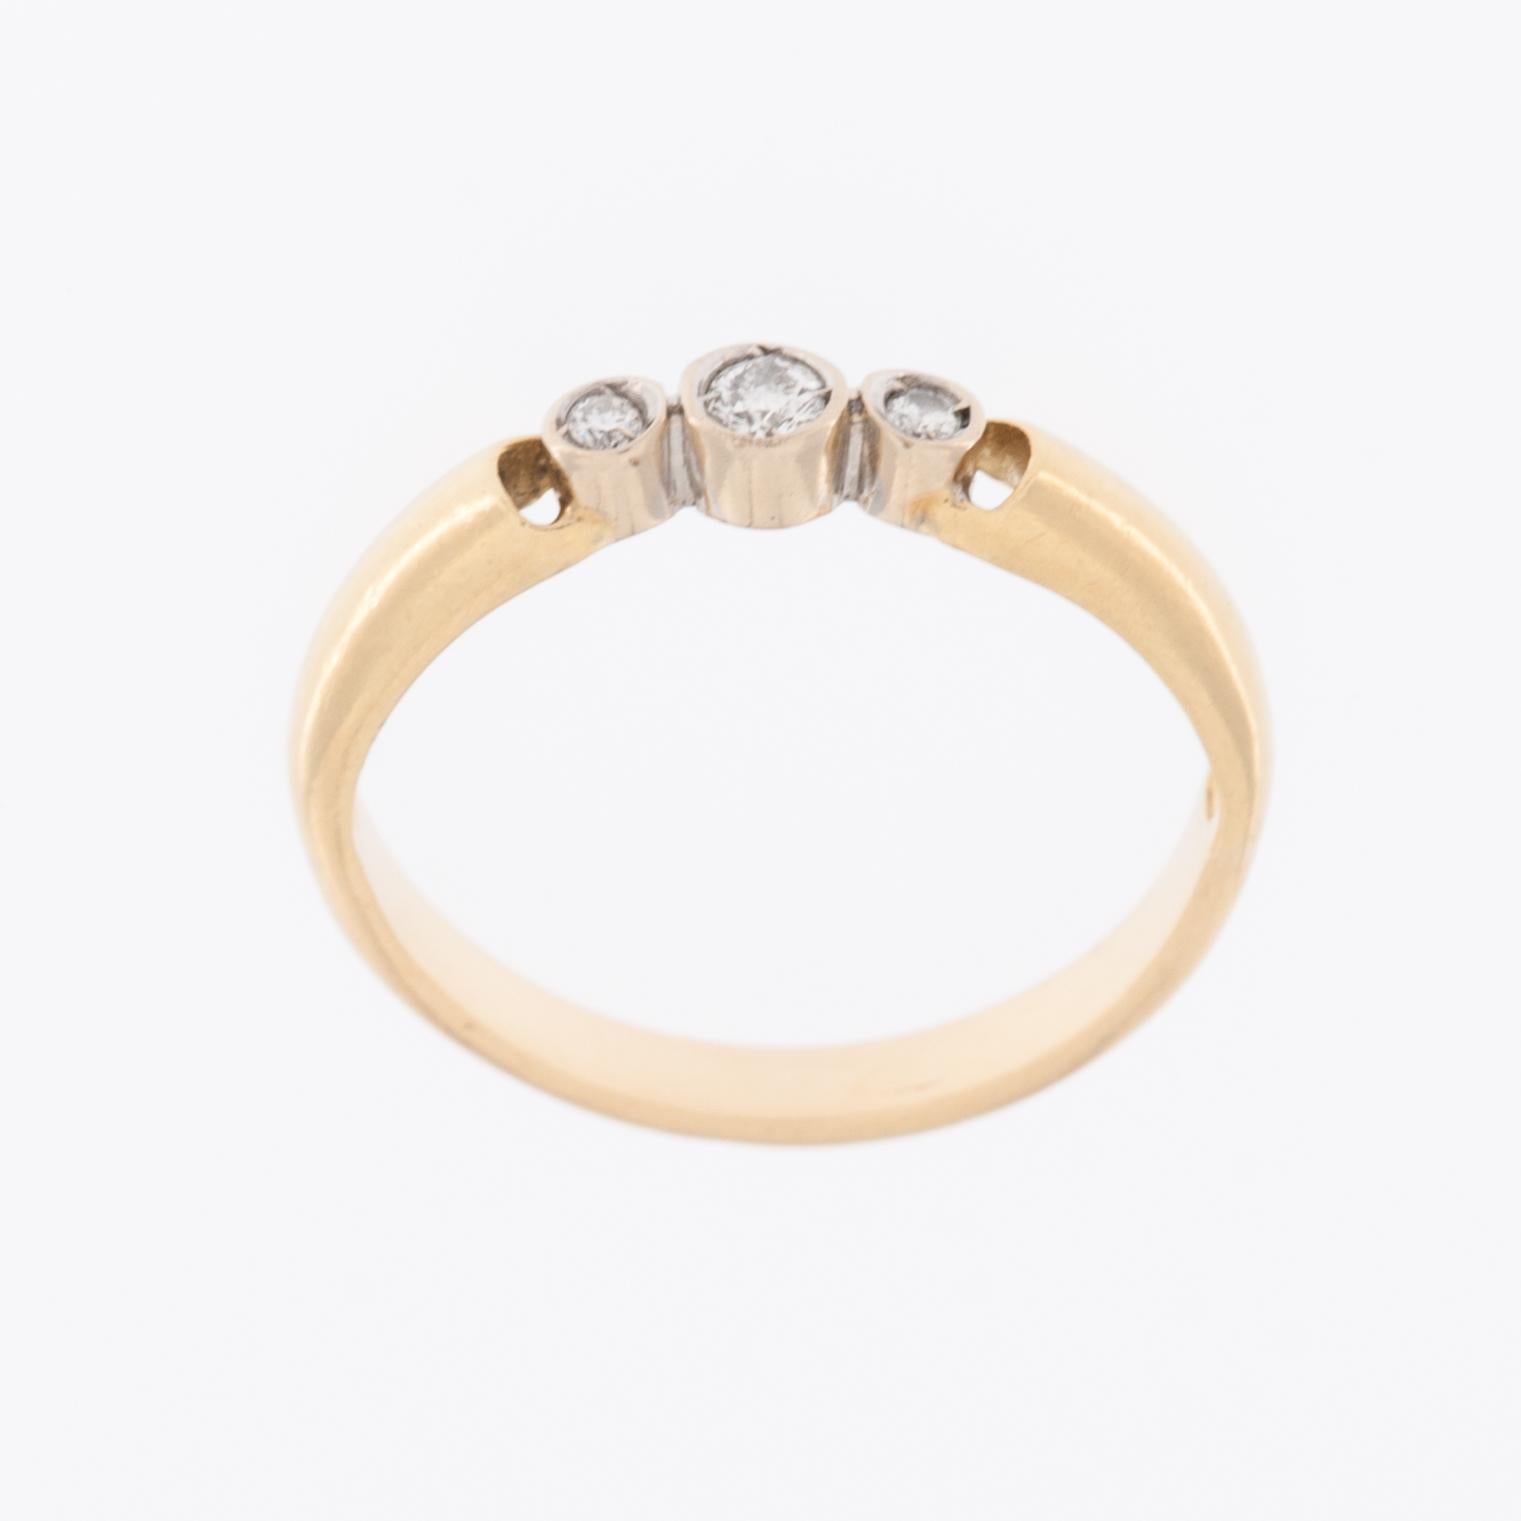 The Vintage Trilogy 18kt Gold Ring is an exquisite piece of jewelry that seamlessly blends timeless design with luxurious materials. Crafted from high-quality 18-karat, this ring showcases a captivating combination of yellow and white gold, adding a